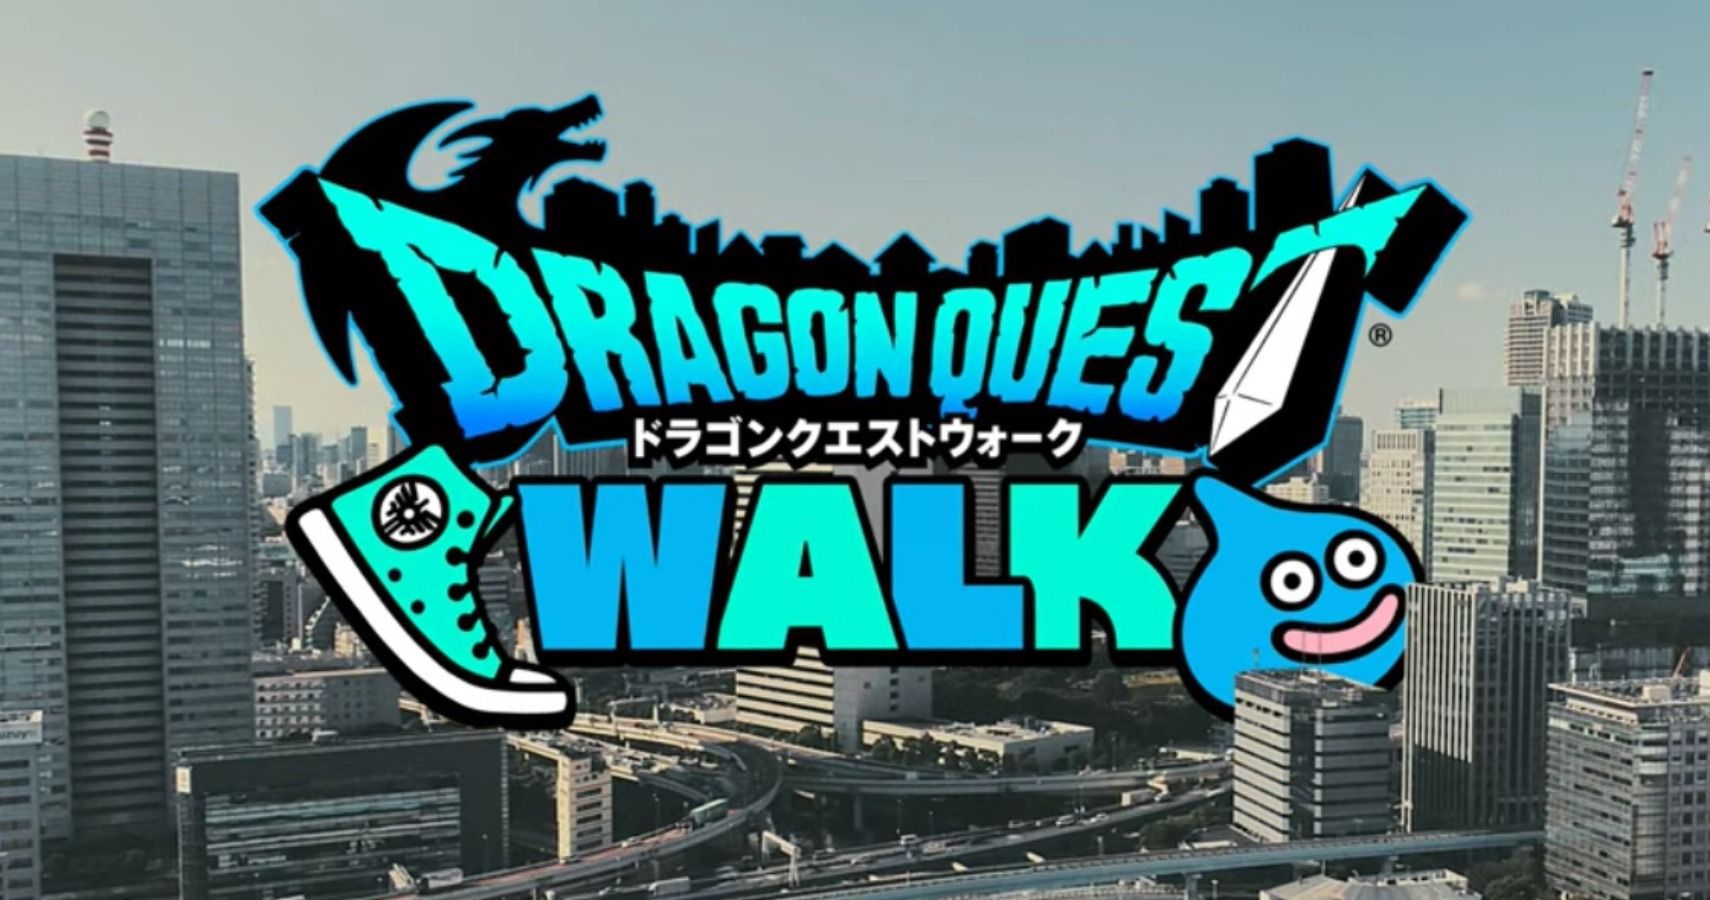 Mobile AR Game Dragon Quest Walk Has Been Downloaded 5 Million Times Its First Week